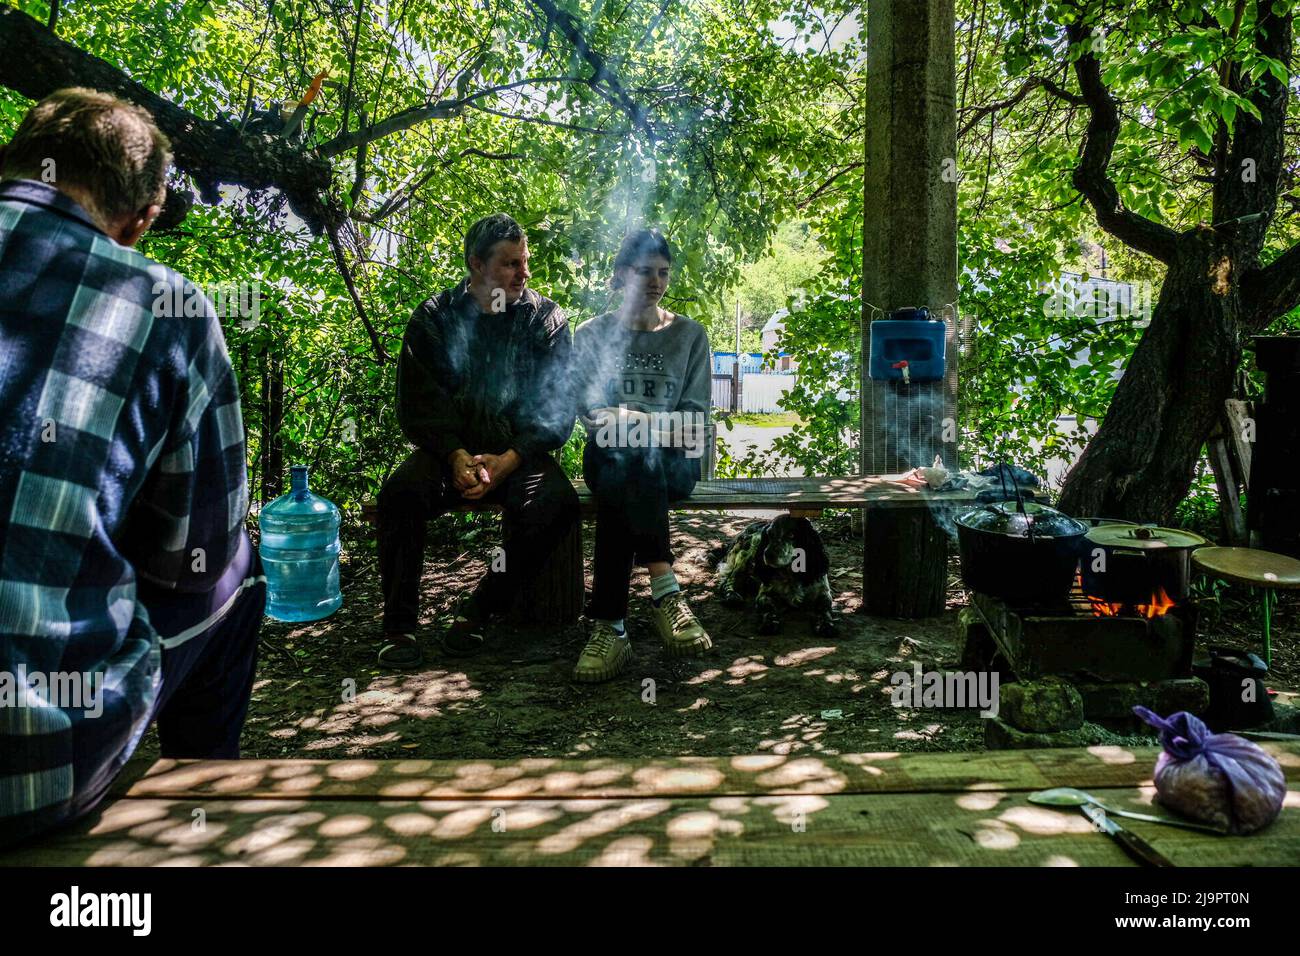 People seat under the trees and cook food near the entrance of a bunker in the outskirts of the city. Lysychansík, Luhansk region. 23 May 2022 Lysychansk is an elongated city on the high right bank of the Donets River in the Luhansk region. The city is part of a metropolitan area that includes Severodonetsk and Rubizhne; the three towns together constitute one of Ukraine's largest chemical complexes. The town is about 7 km from the frontline, and Russian troops are moving towards it, the city, like Severodonetsk, is almost isolated. Russian are trying to occupy the main road that connect Lysy Stock Photo